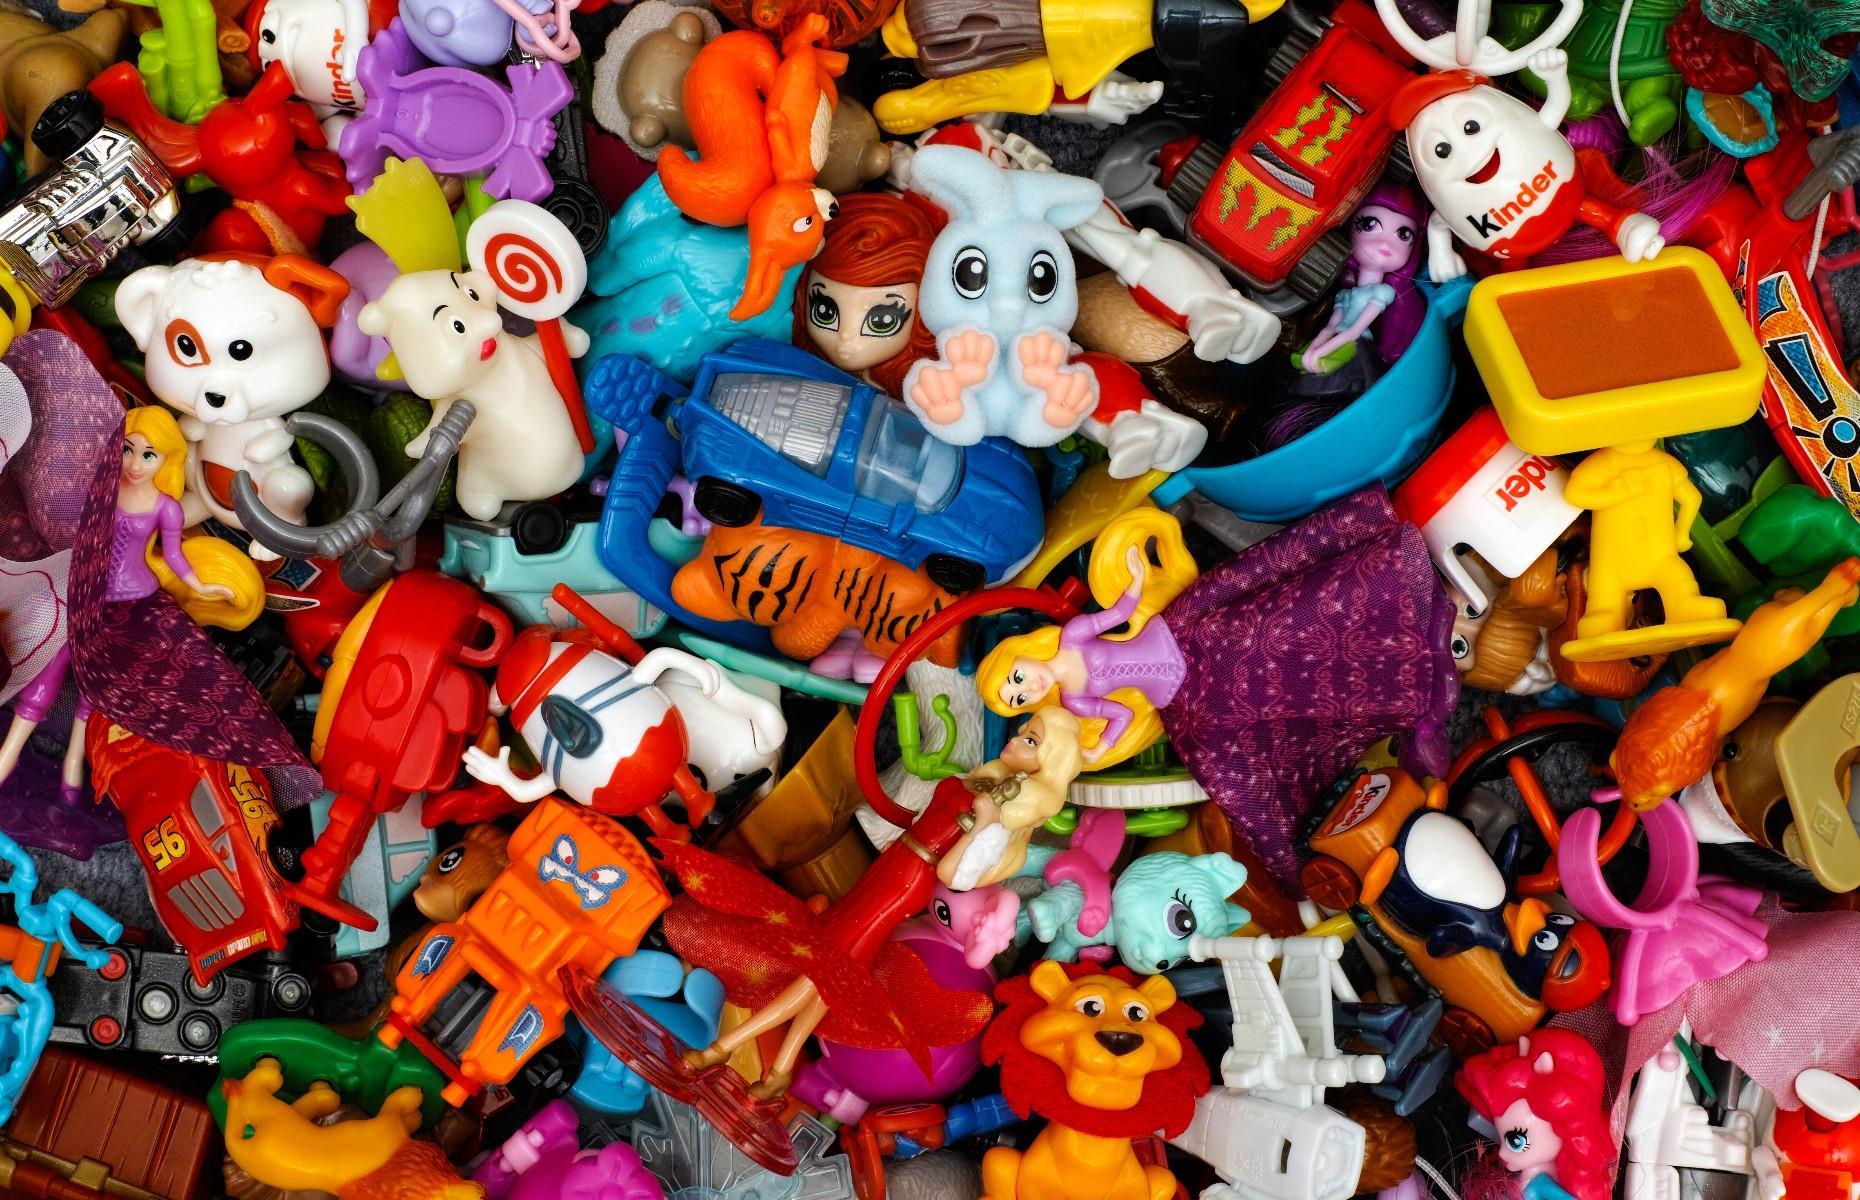 Complimentary toys prized by collectors